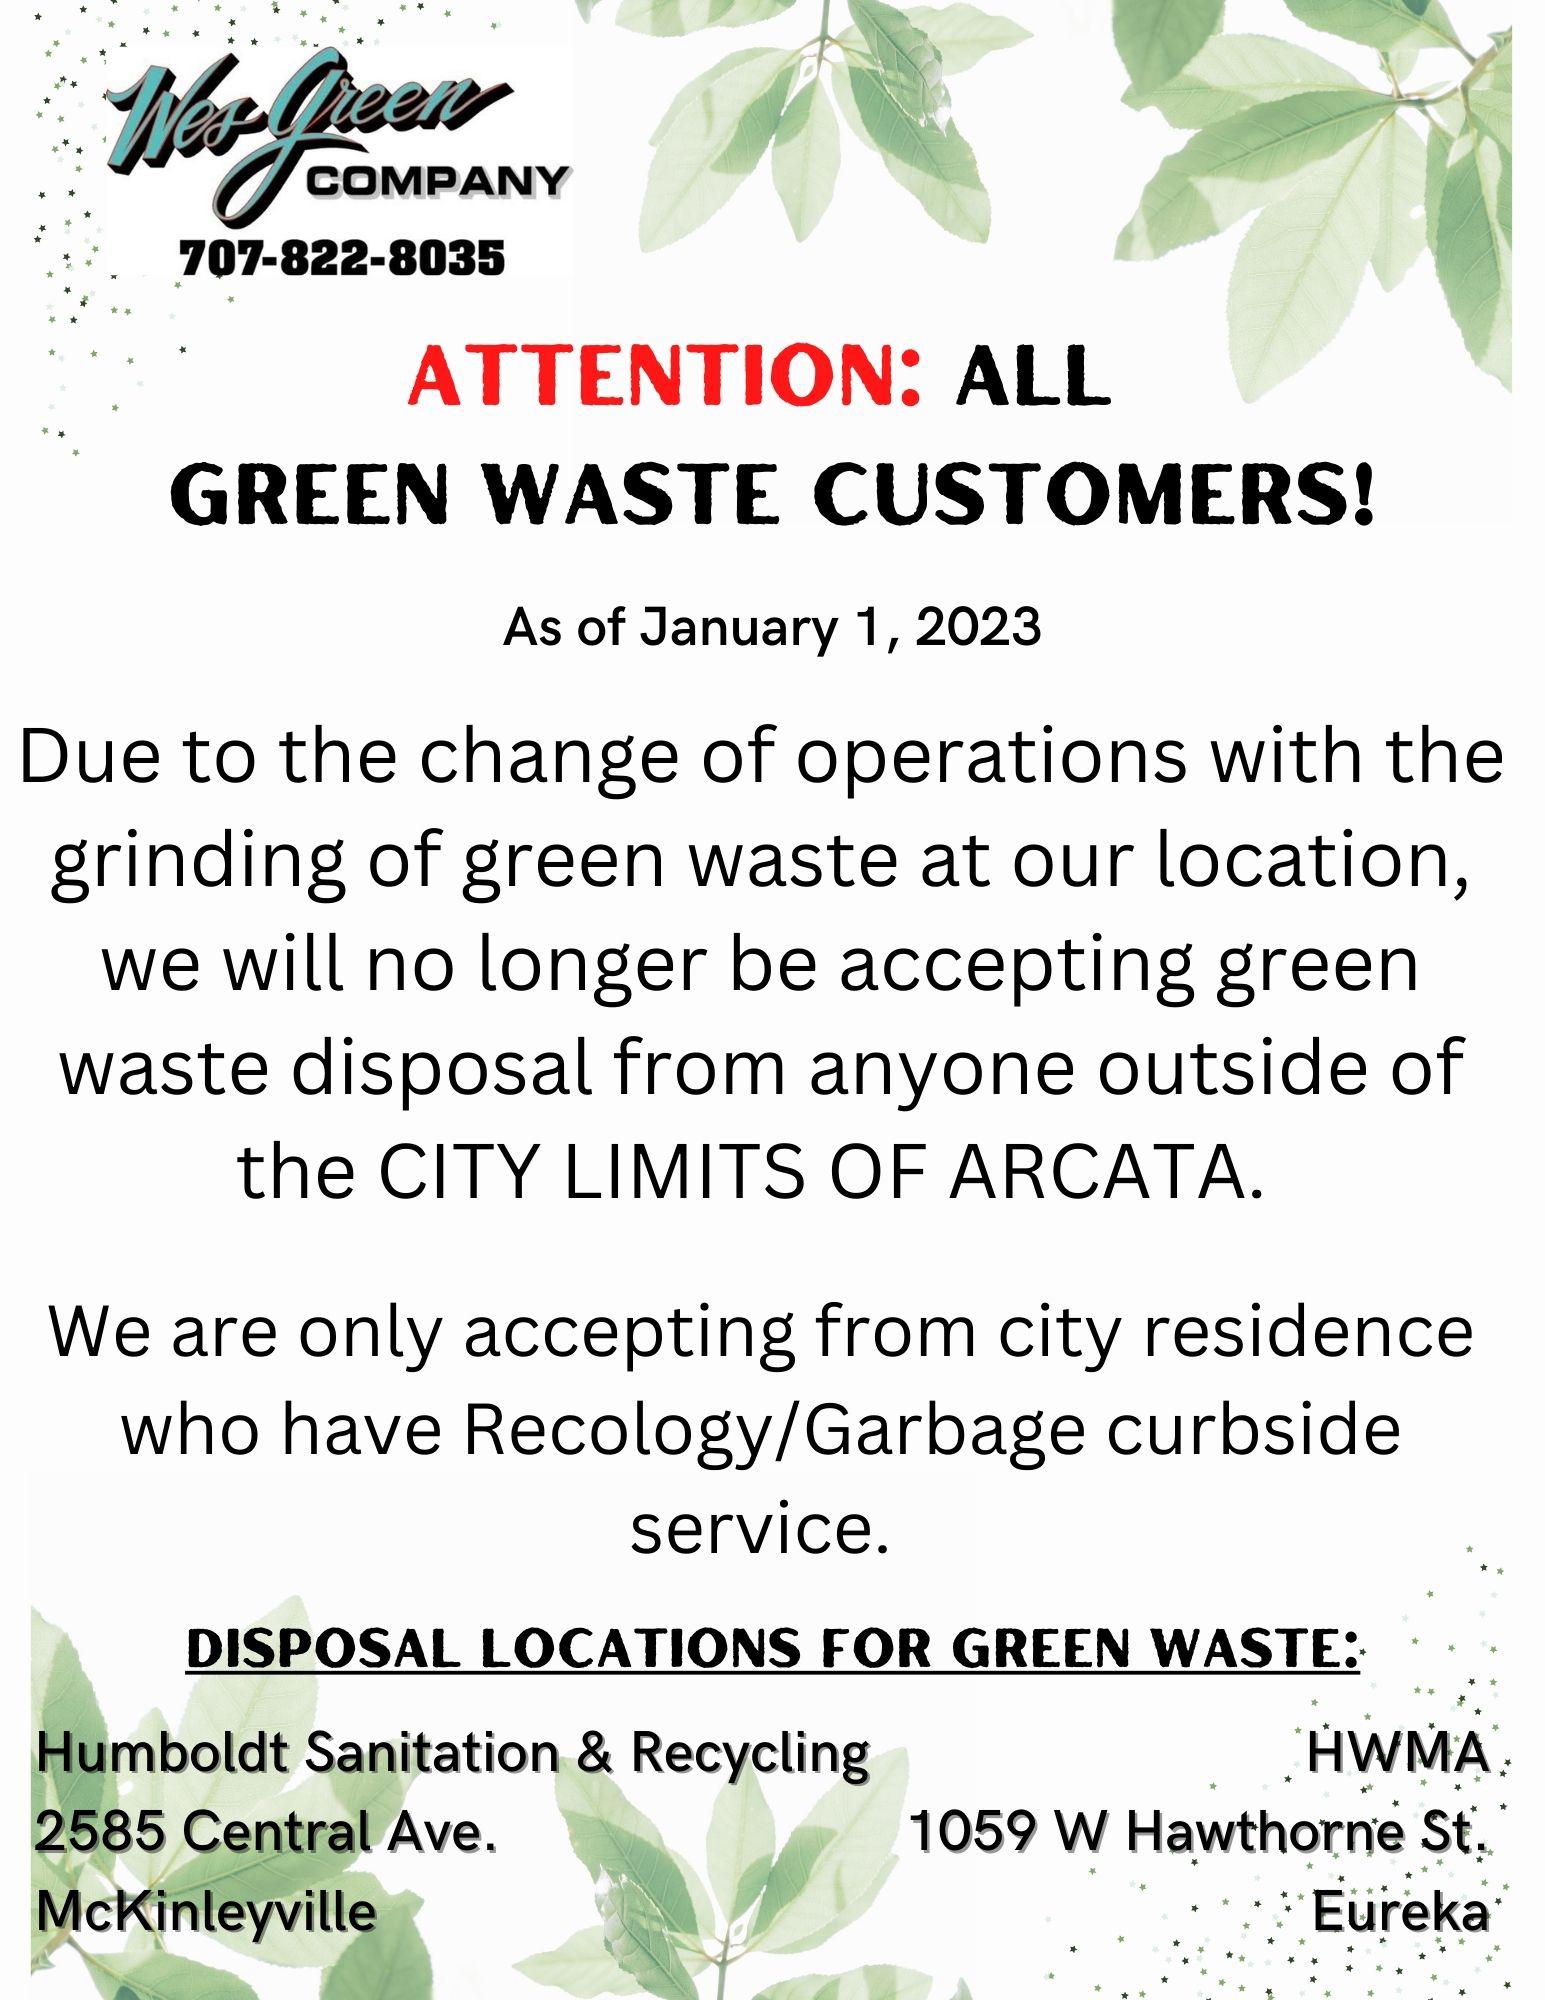 ATTENTION ALL GREEN WASTE CUSTOMERS!